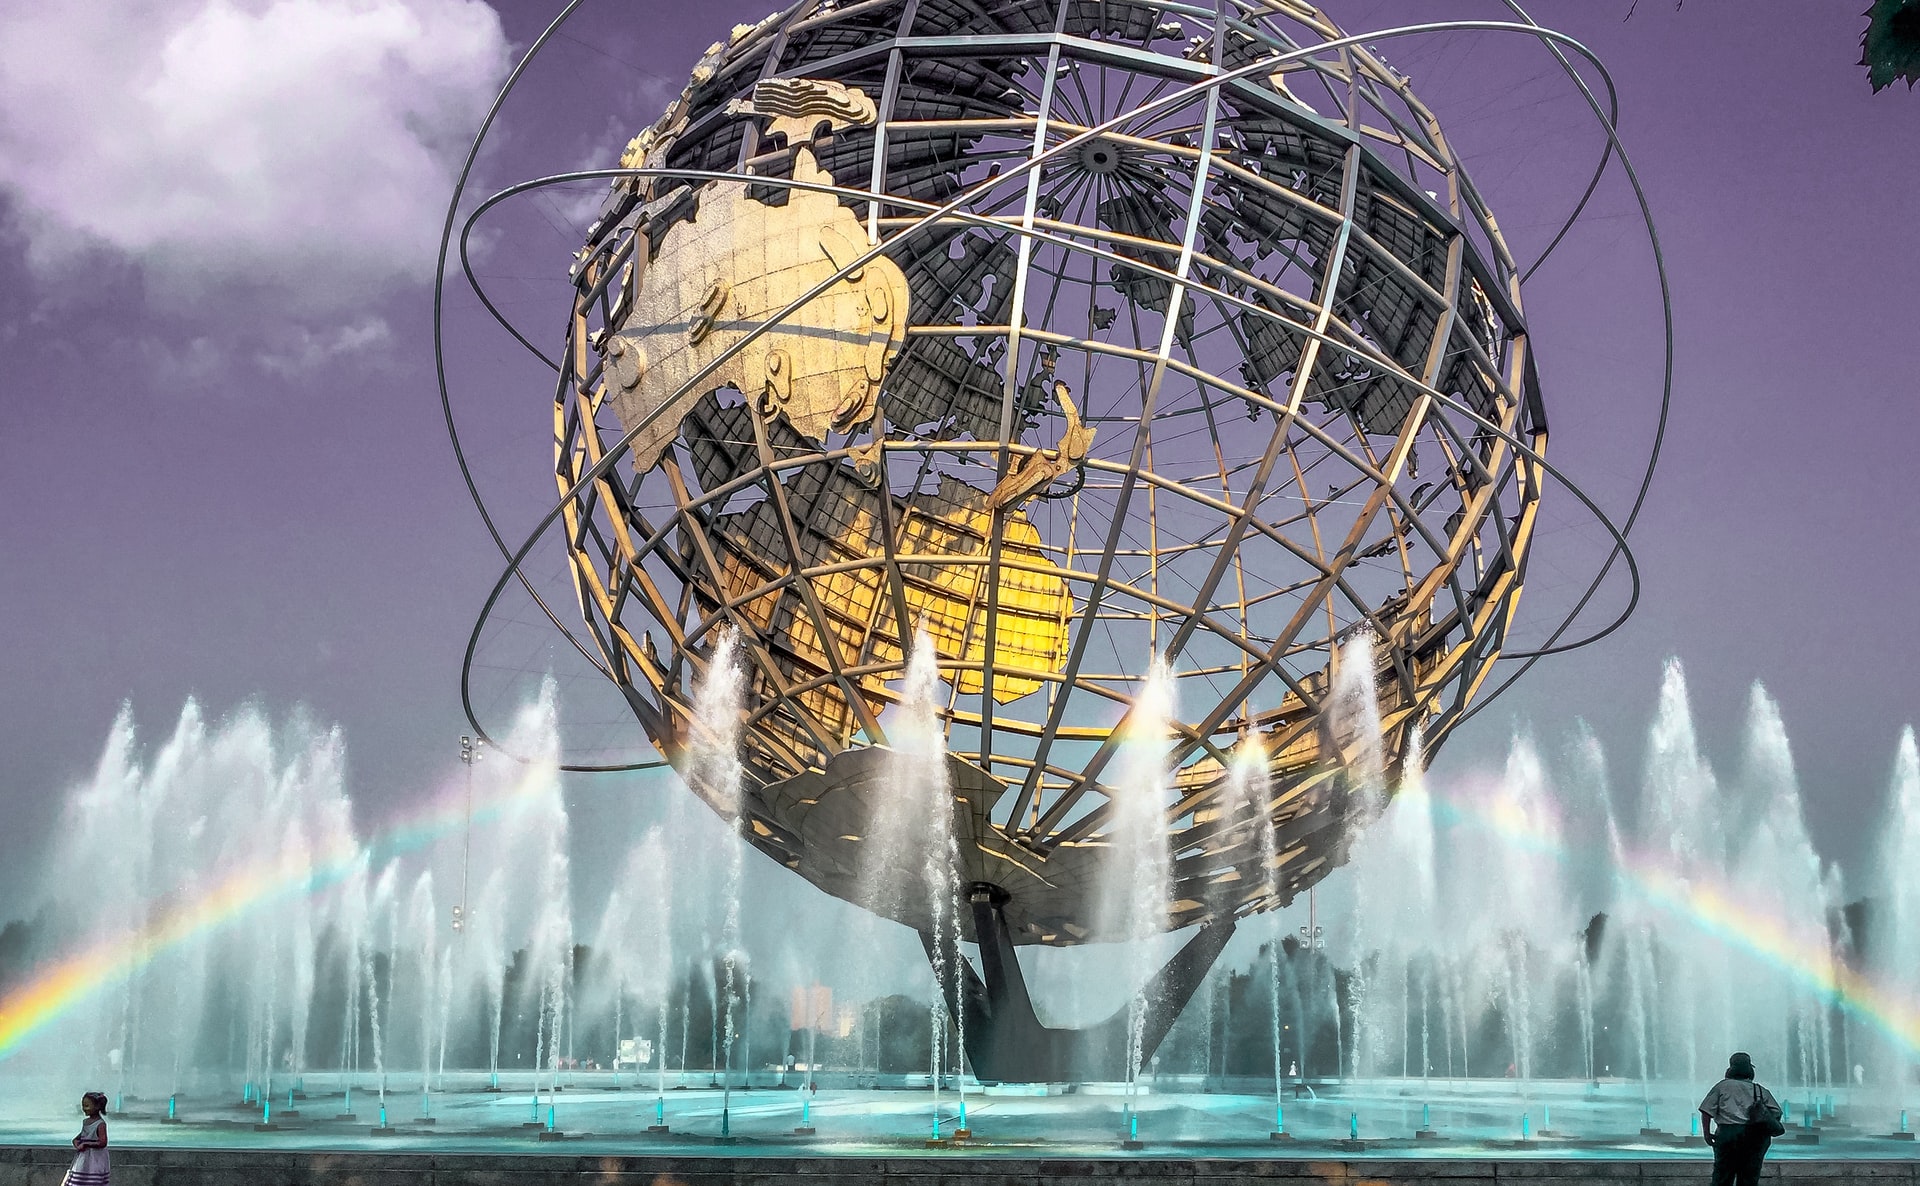 A picture of the Unisphere, a spherical stainless steel representation of Earth located in the Meadows–Corona Park in Flushing, Queens.